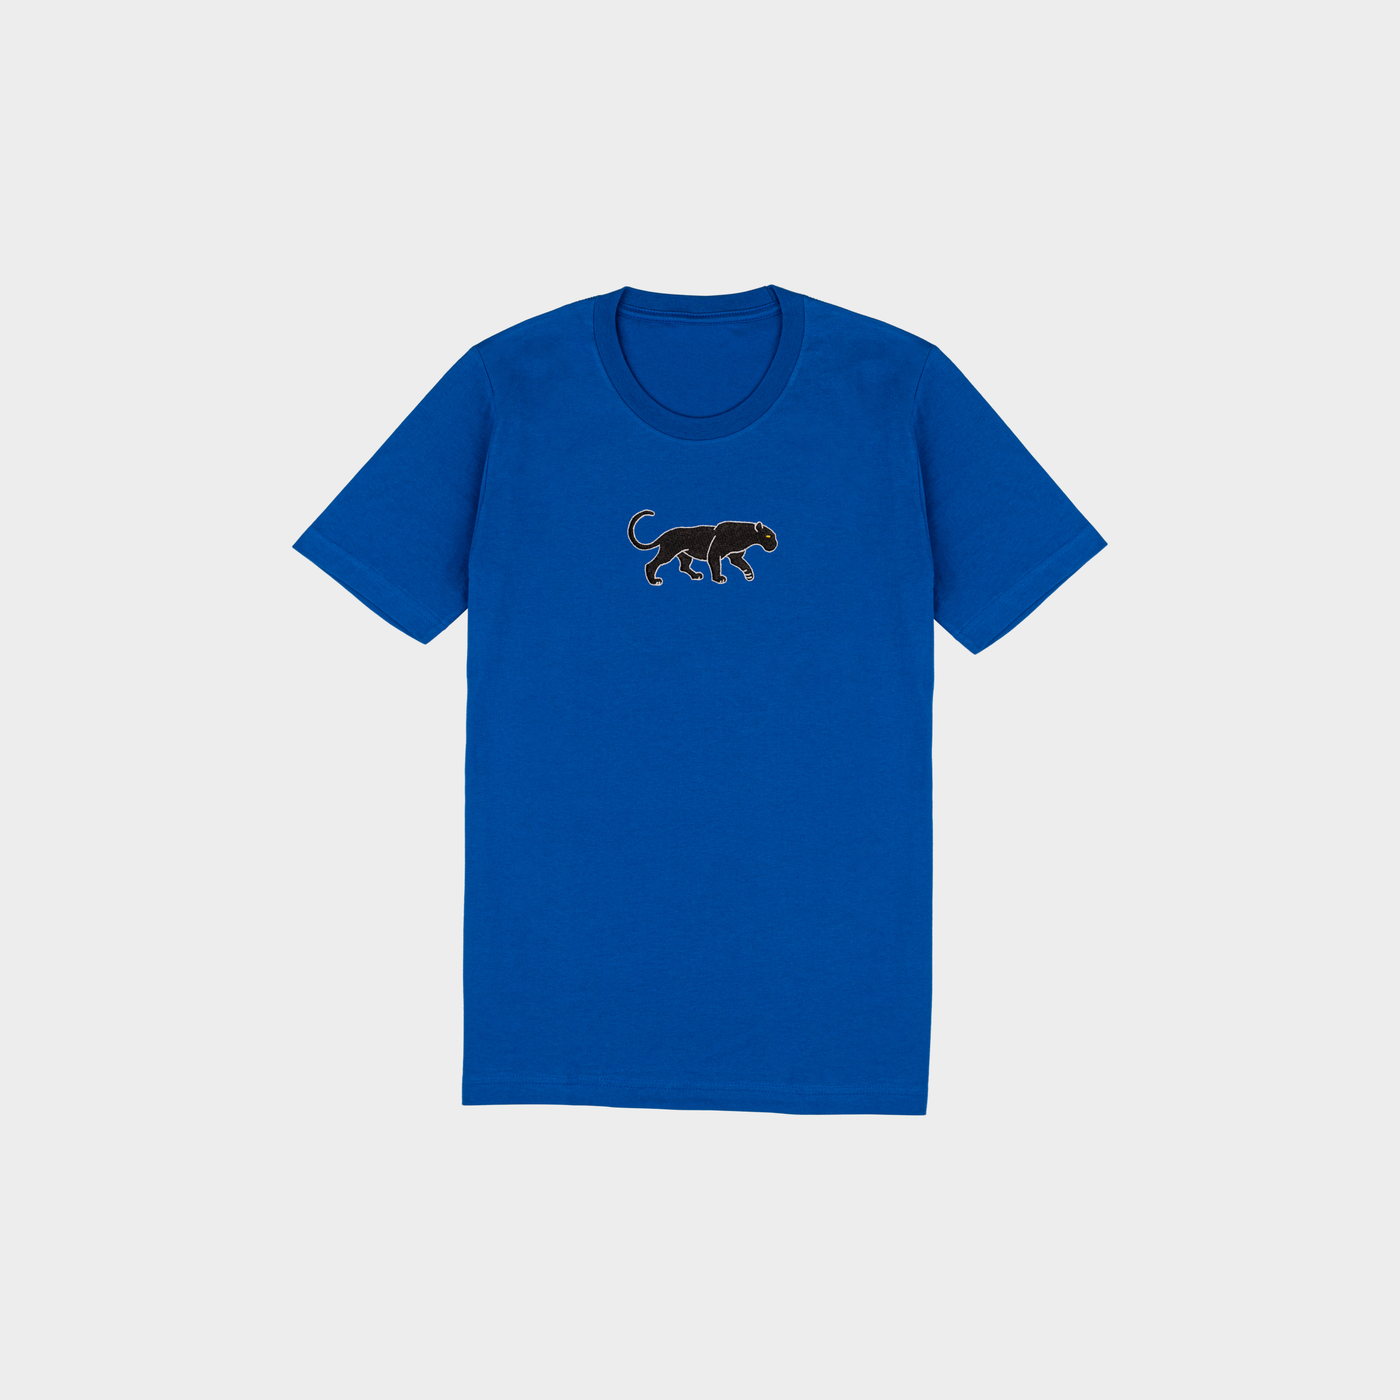 Bobby's Planet Kids Embroidered Black Jaguar T-Shirt from South American Amazon Animals Collection in True Royal Color#color_true-royal